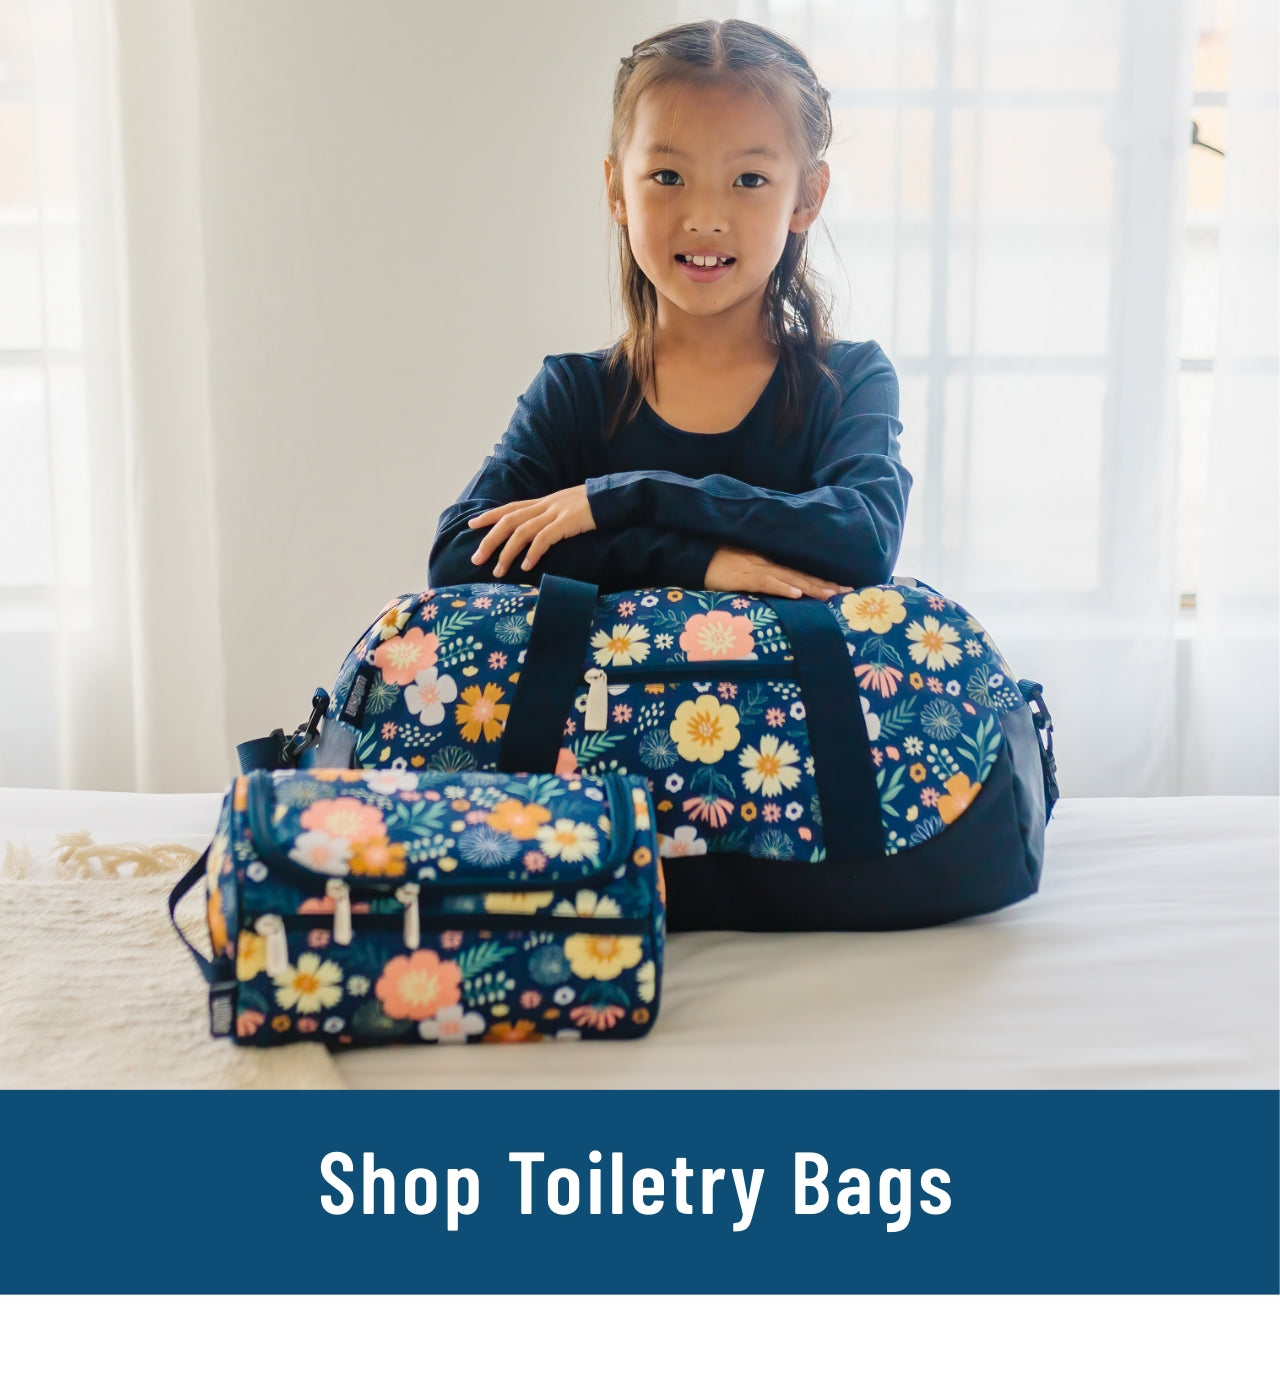 Image of girl smiling with matching duffel bag and toiletry bag with the Wildflower Bloom pattern. Link to shop toiletry bags.